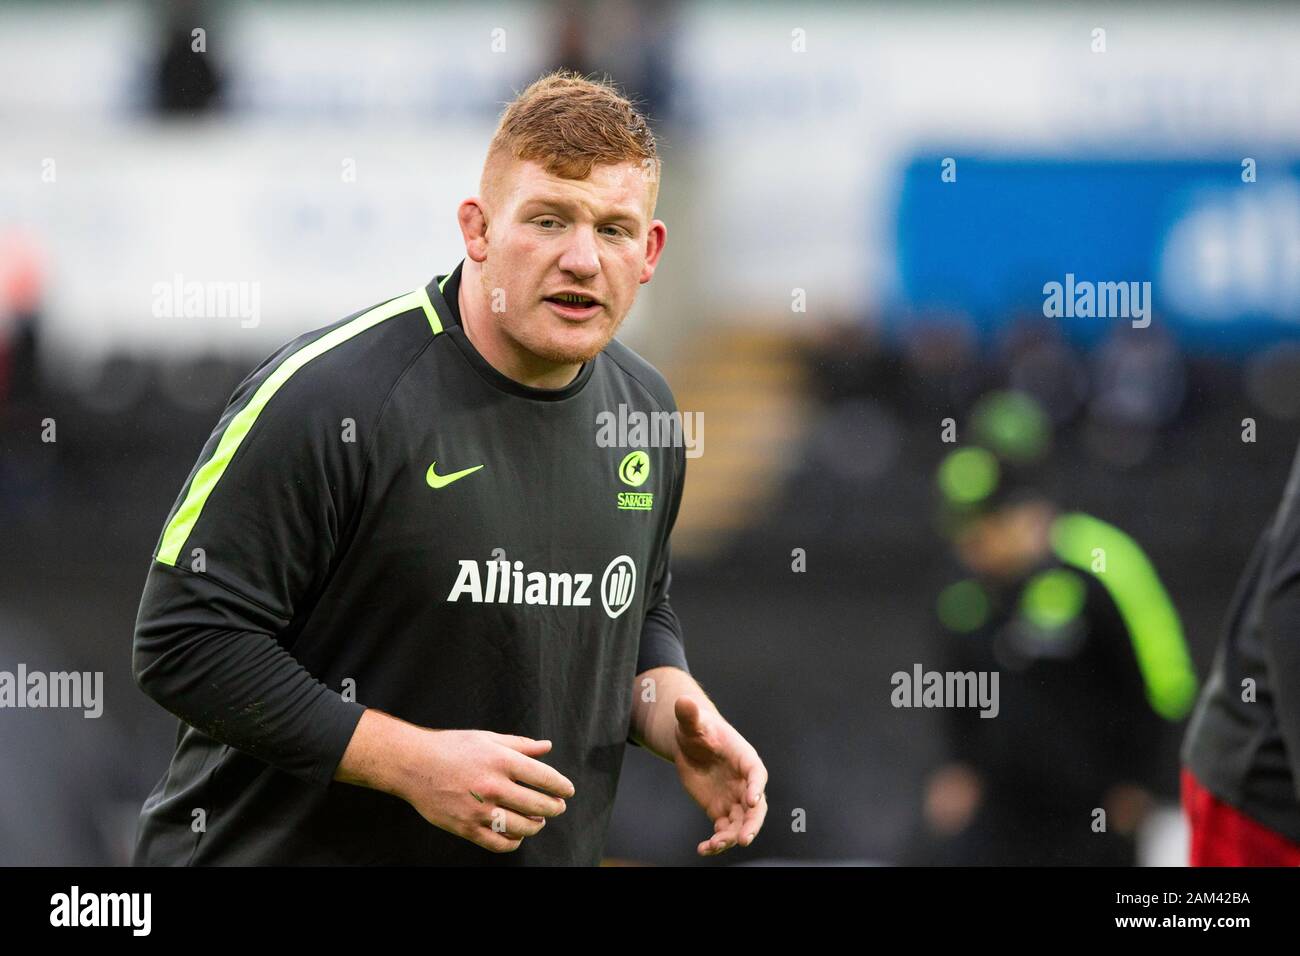 Swansea, UK. 11th Jan, 2020. Saracens prop Rhys Carre warms up ahead of the Ospreys v Saracens Heineken Champions Cup Rugby Match. Credit: Gruffydd Ll. Thomas/Alamy Live News Stock Photo